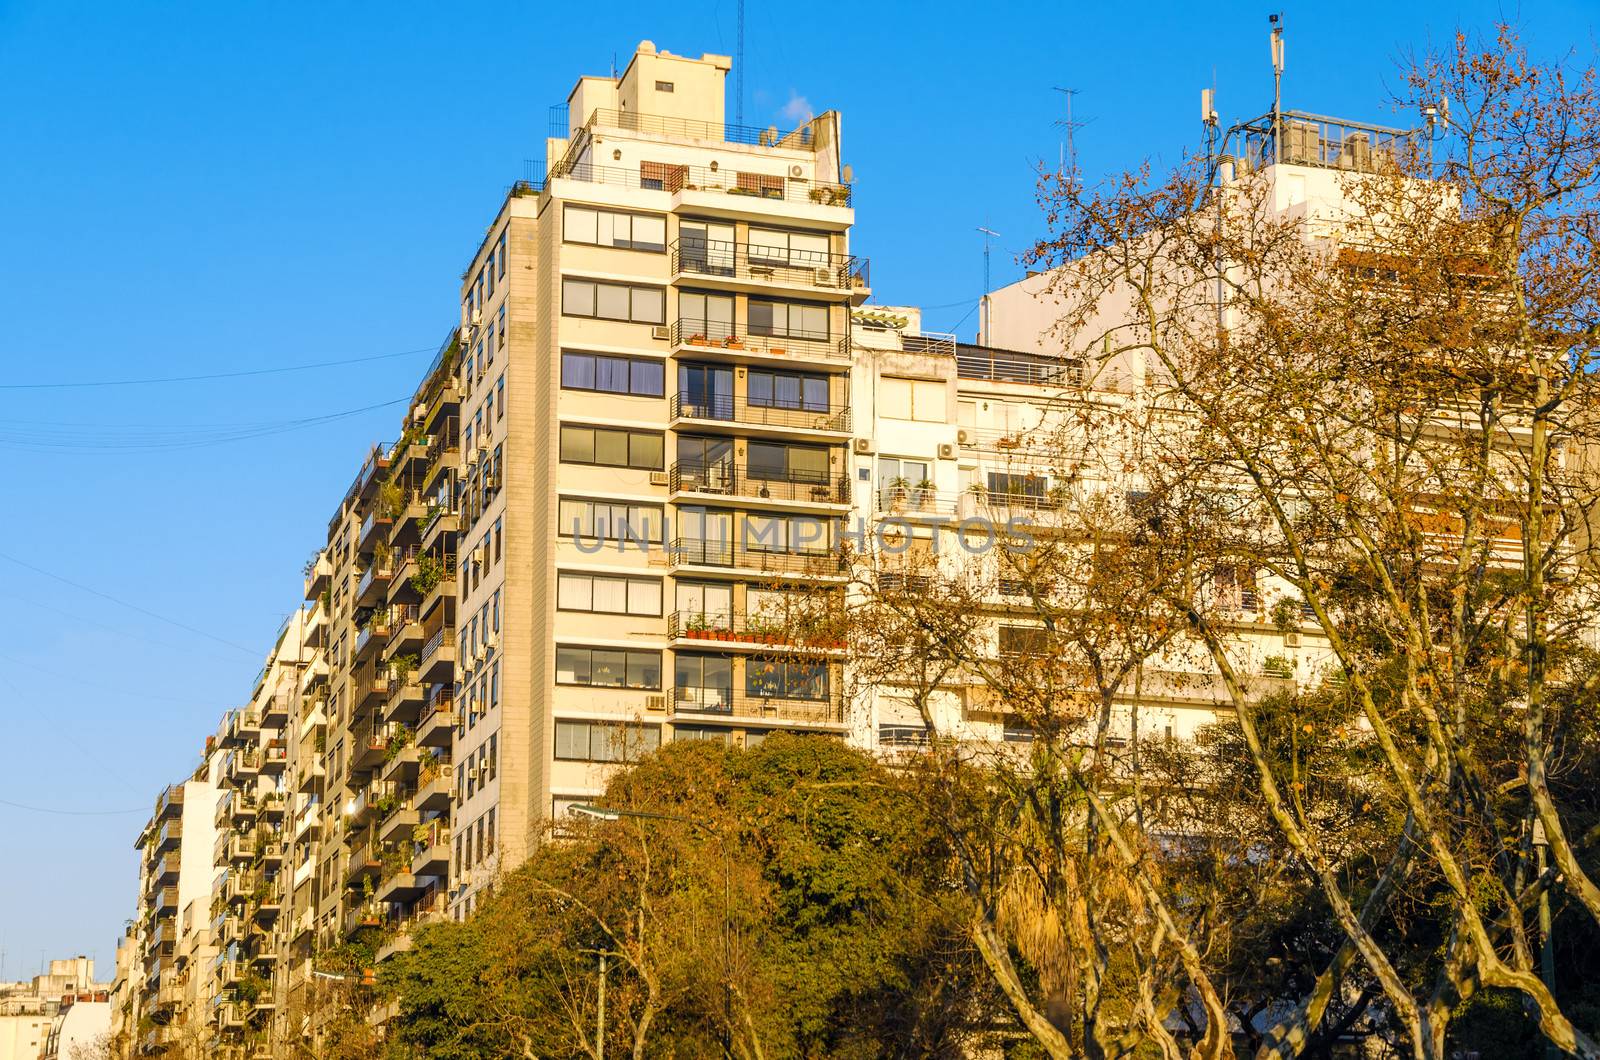 View of apartment buildings in Buenos Aires, Argentina